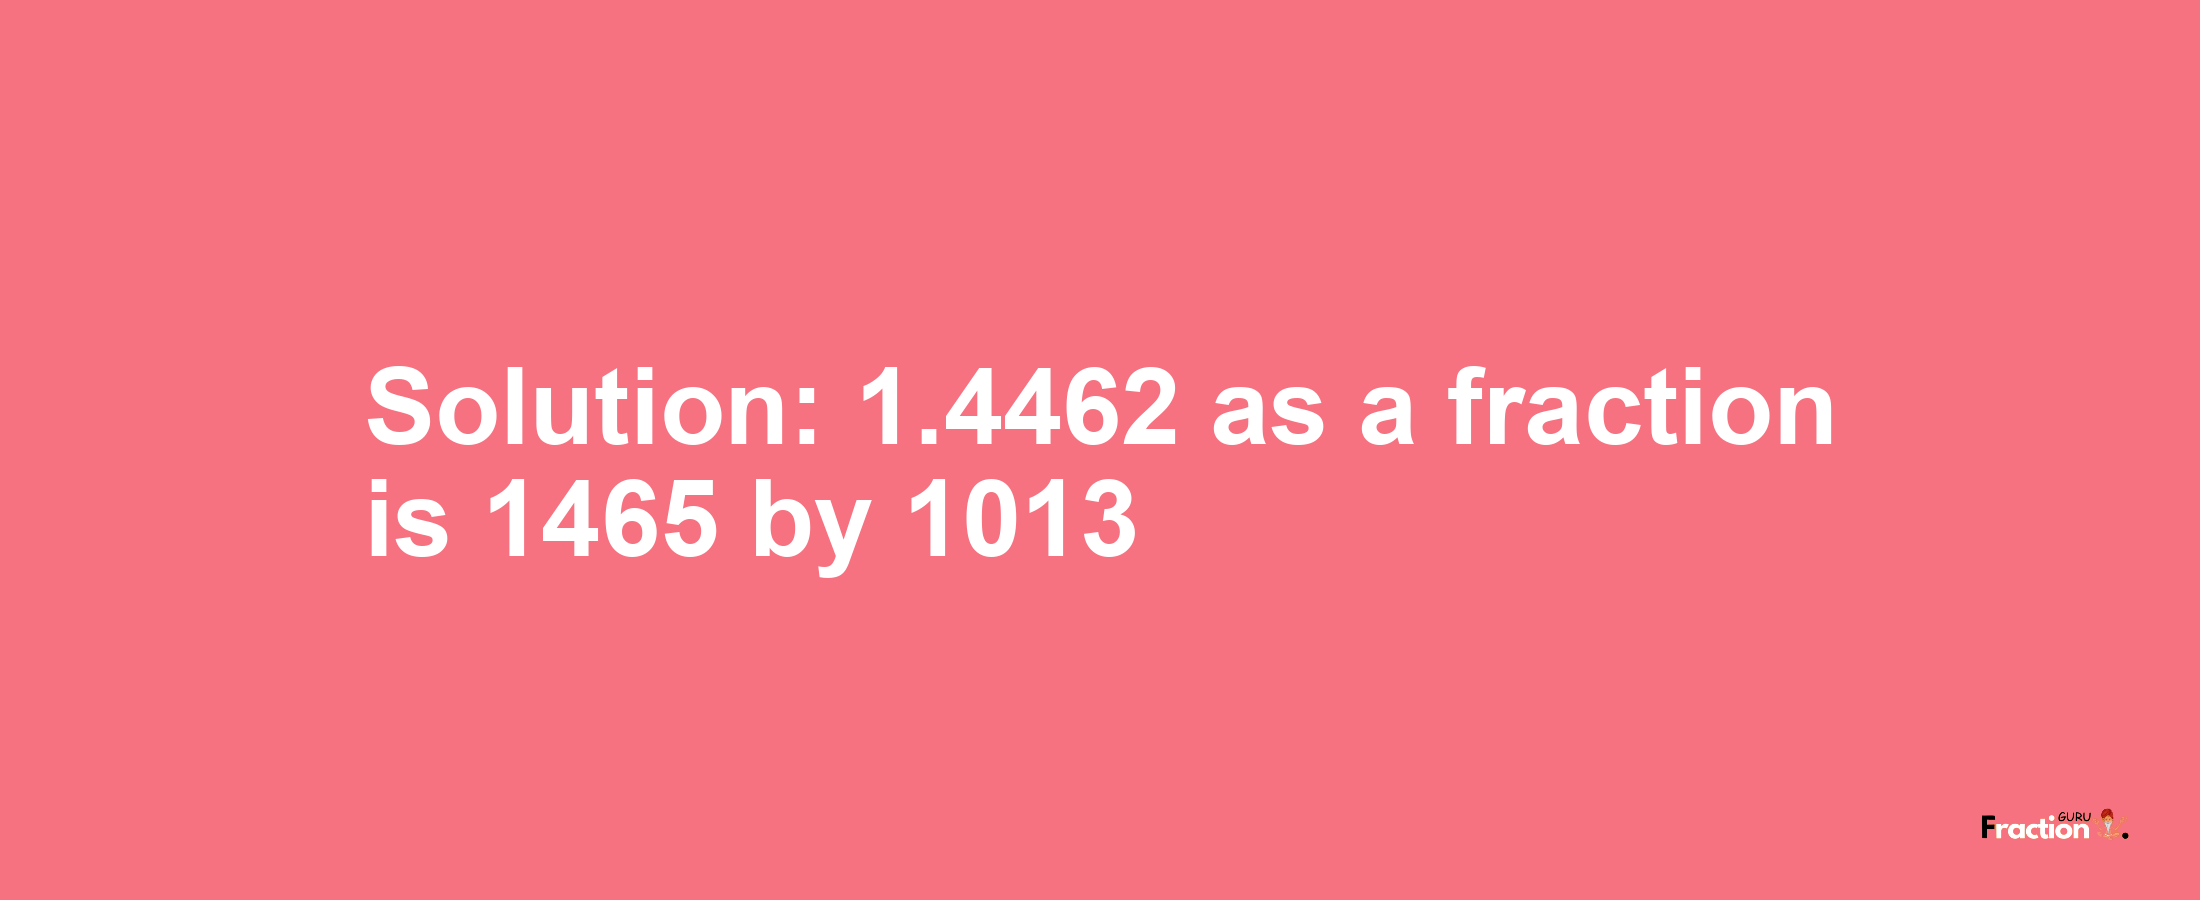 Solution:1.4462 as a fraction is 1465/1013